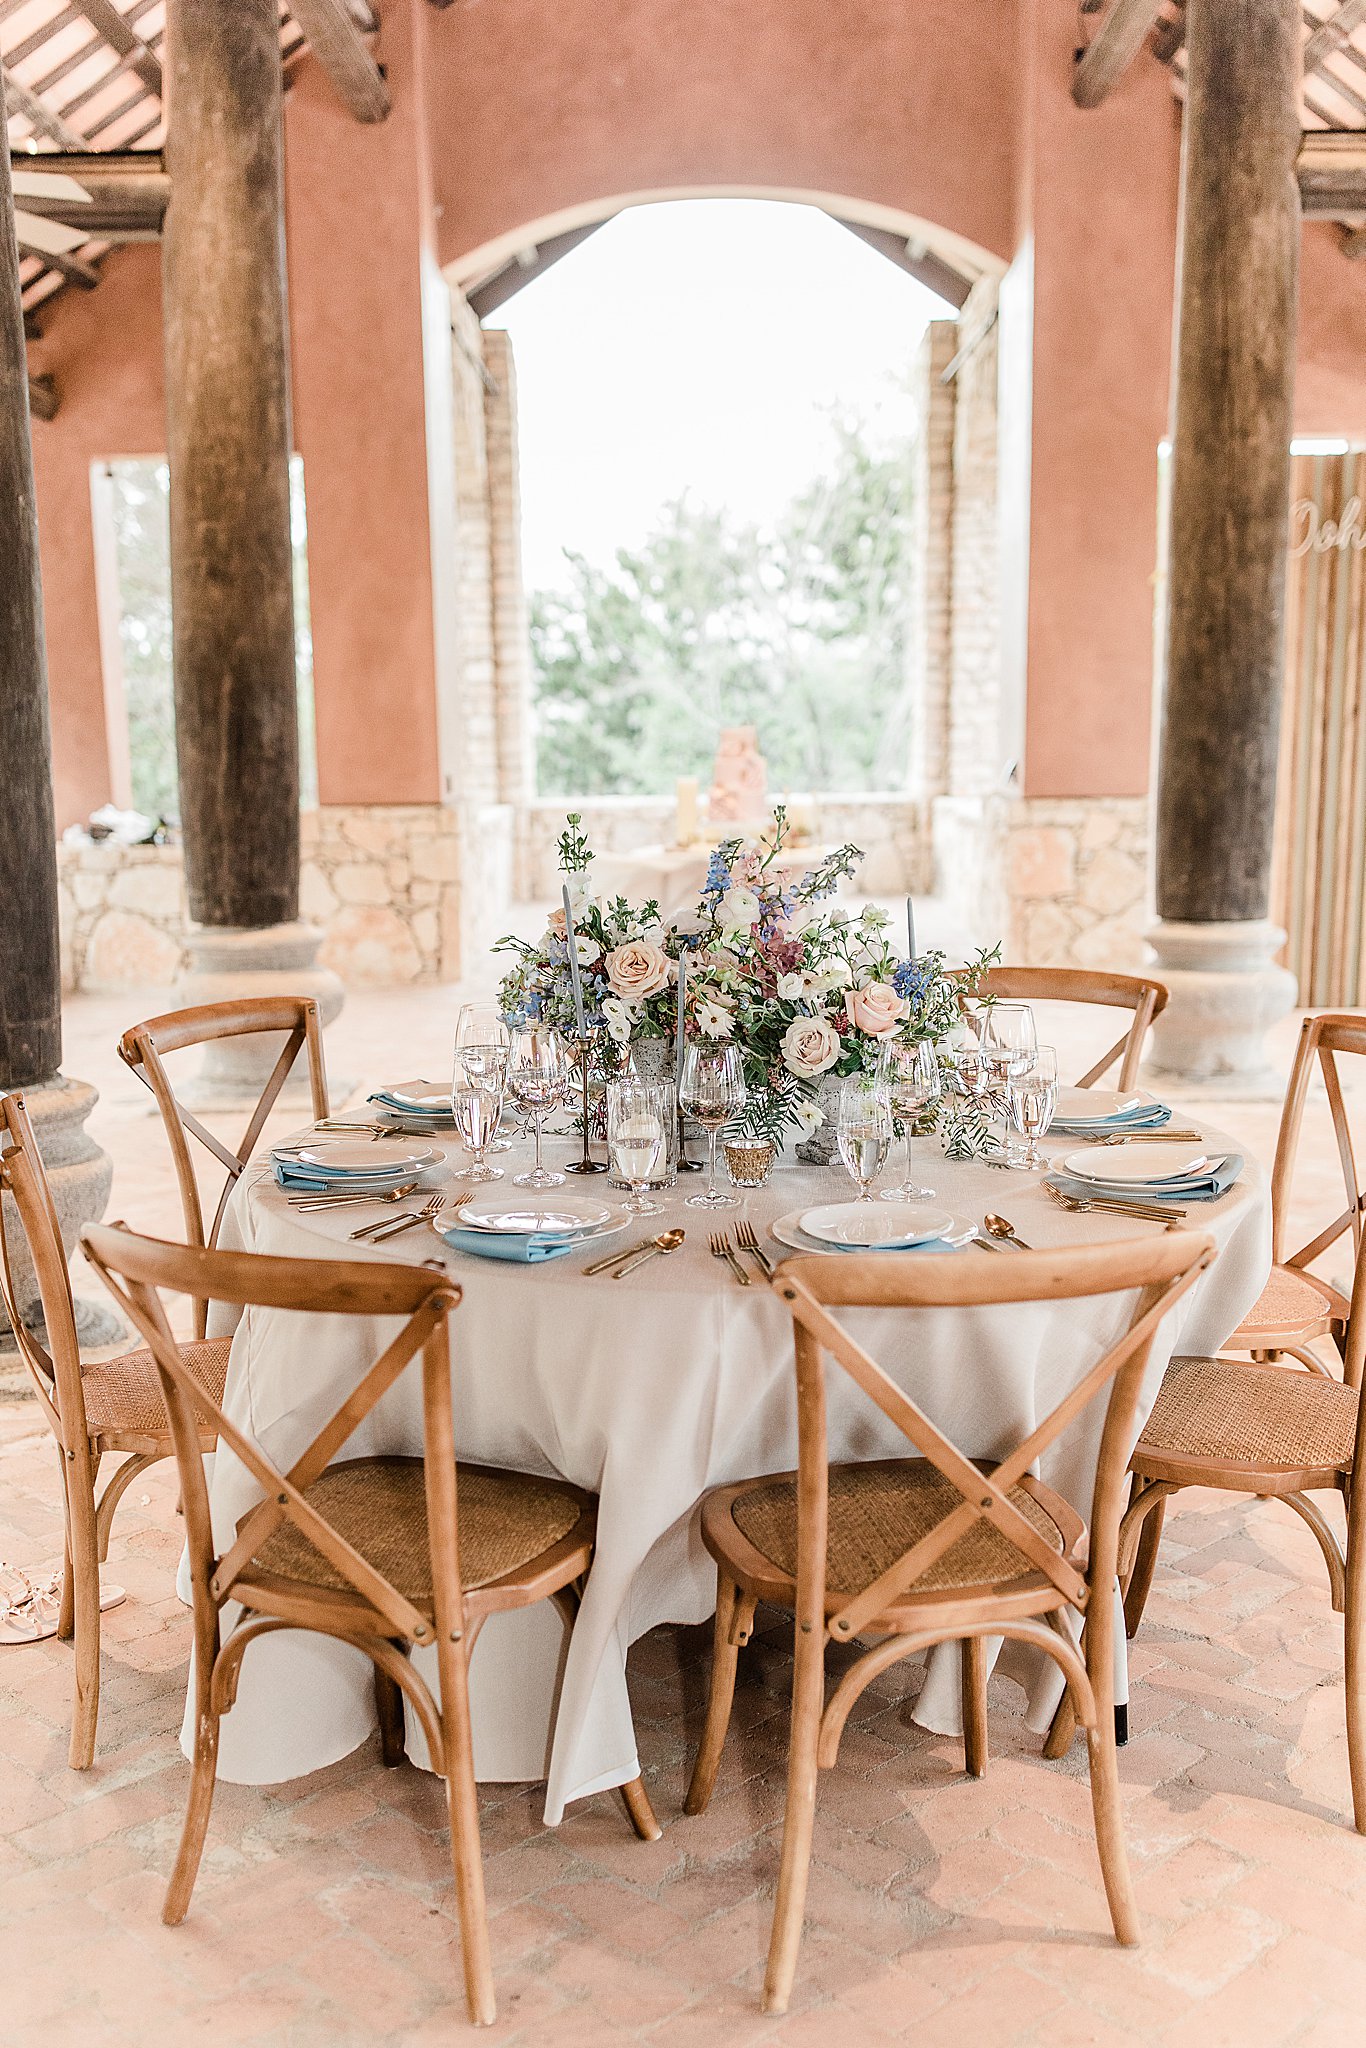 Romantic outdoor reception in Austin, Texas with blush, blue and cream florals, cream table linens, wooden chairs wedding reception